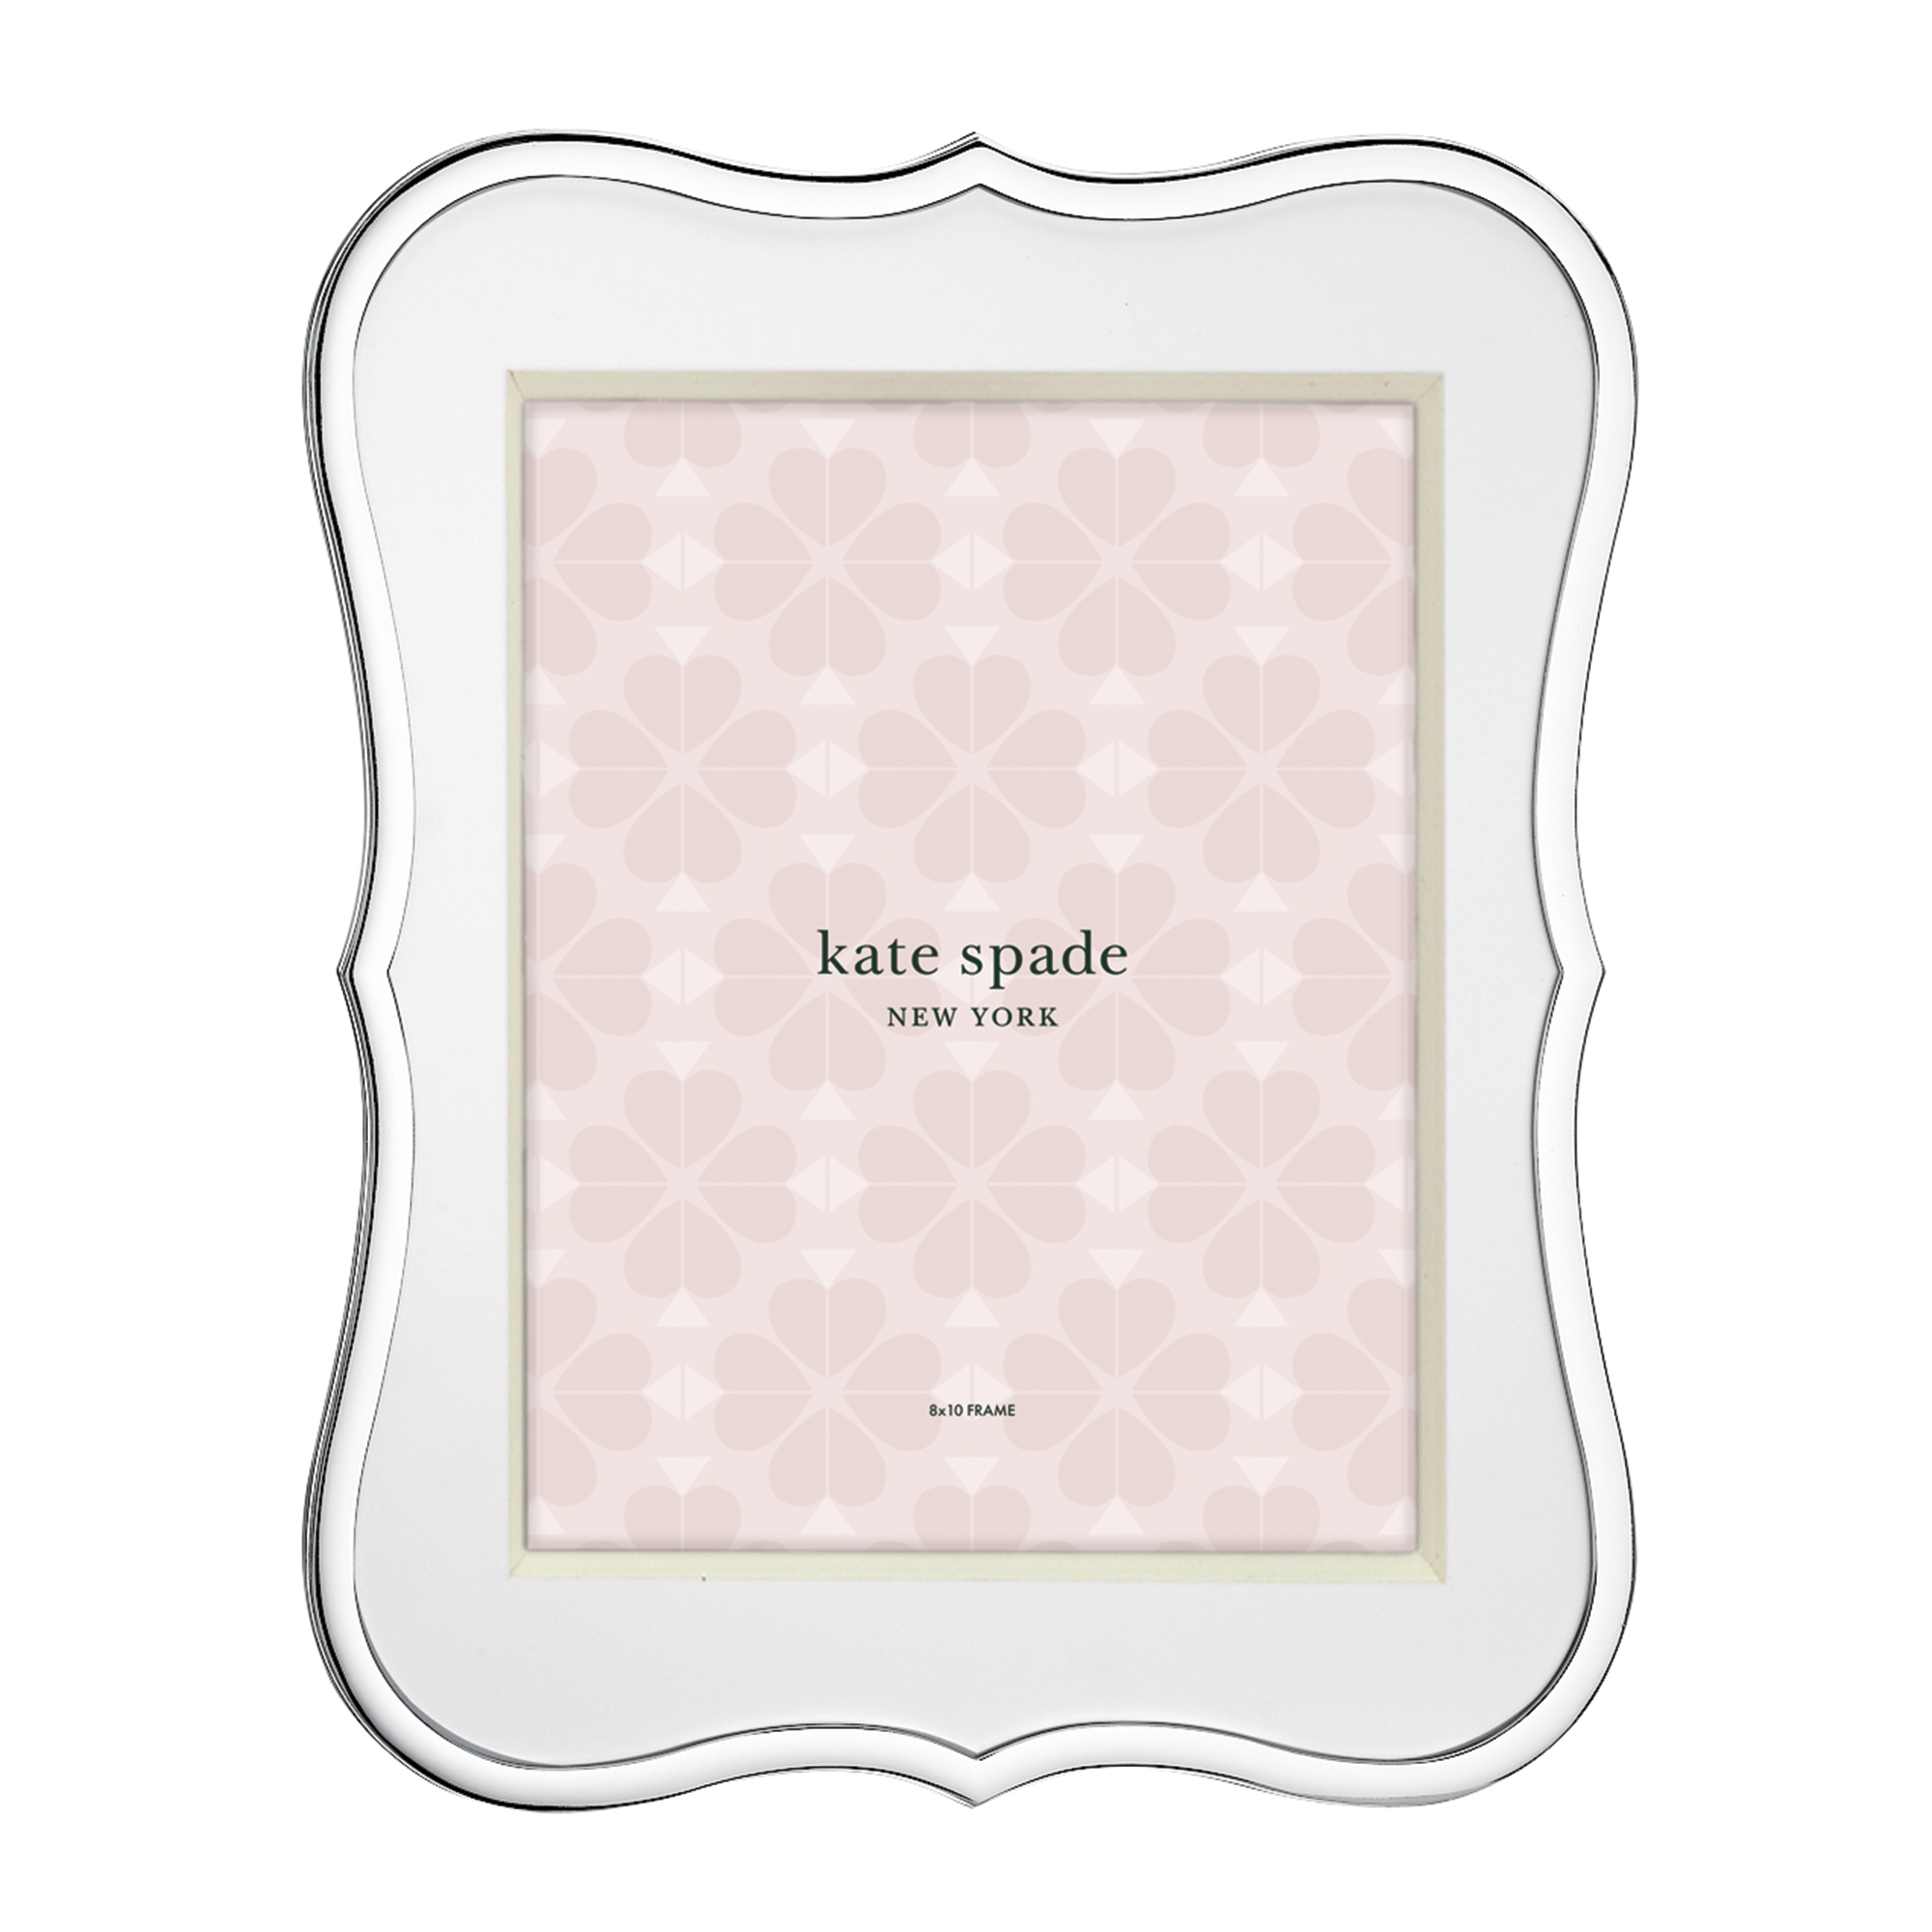 Kate Spade New York Make It Pop Picture Frame - Pink